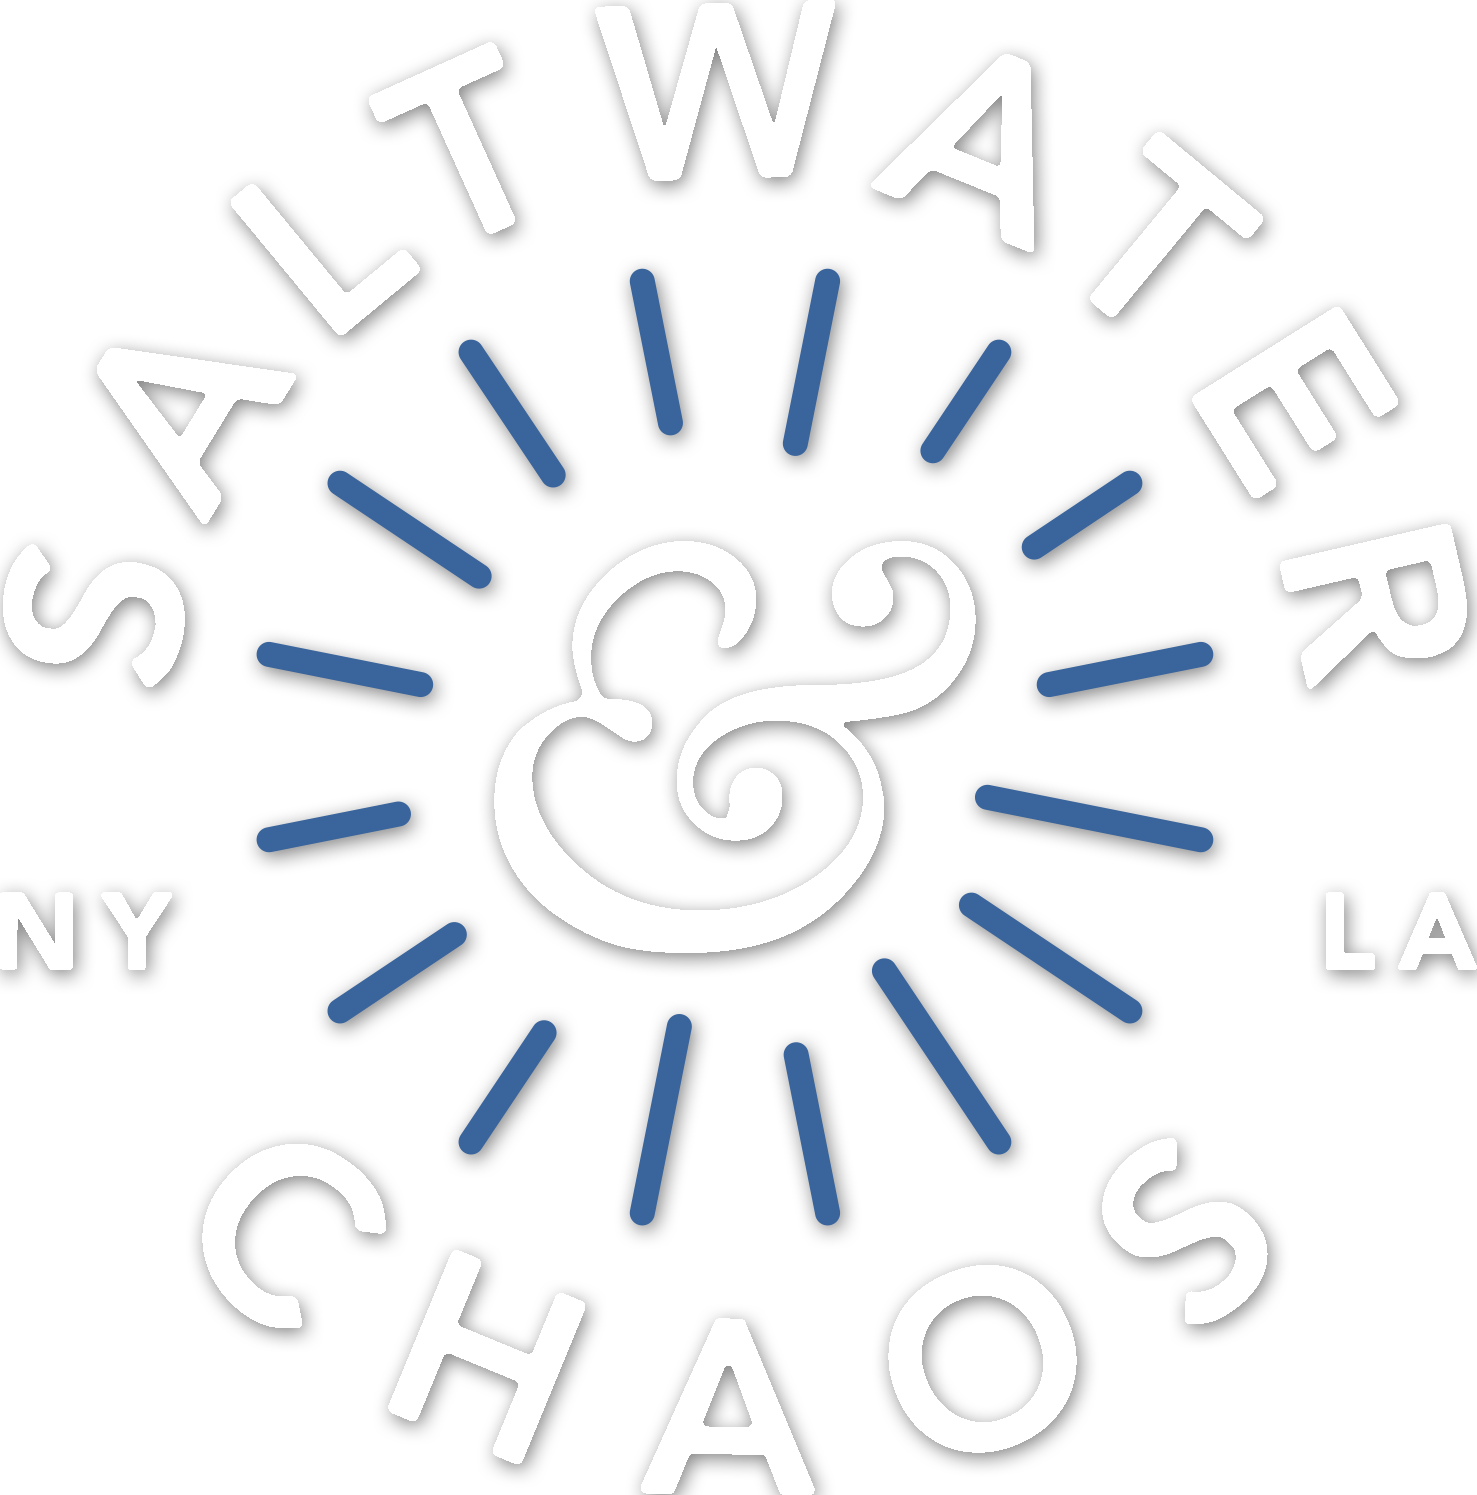 Saltwater & Chaos